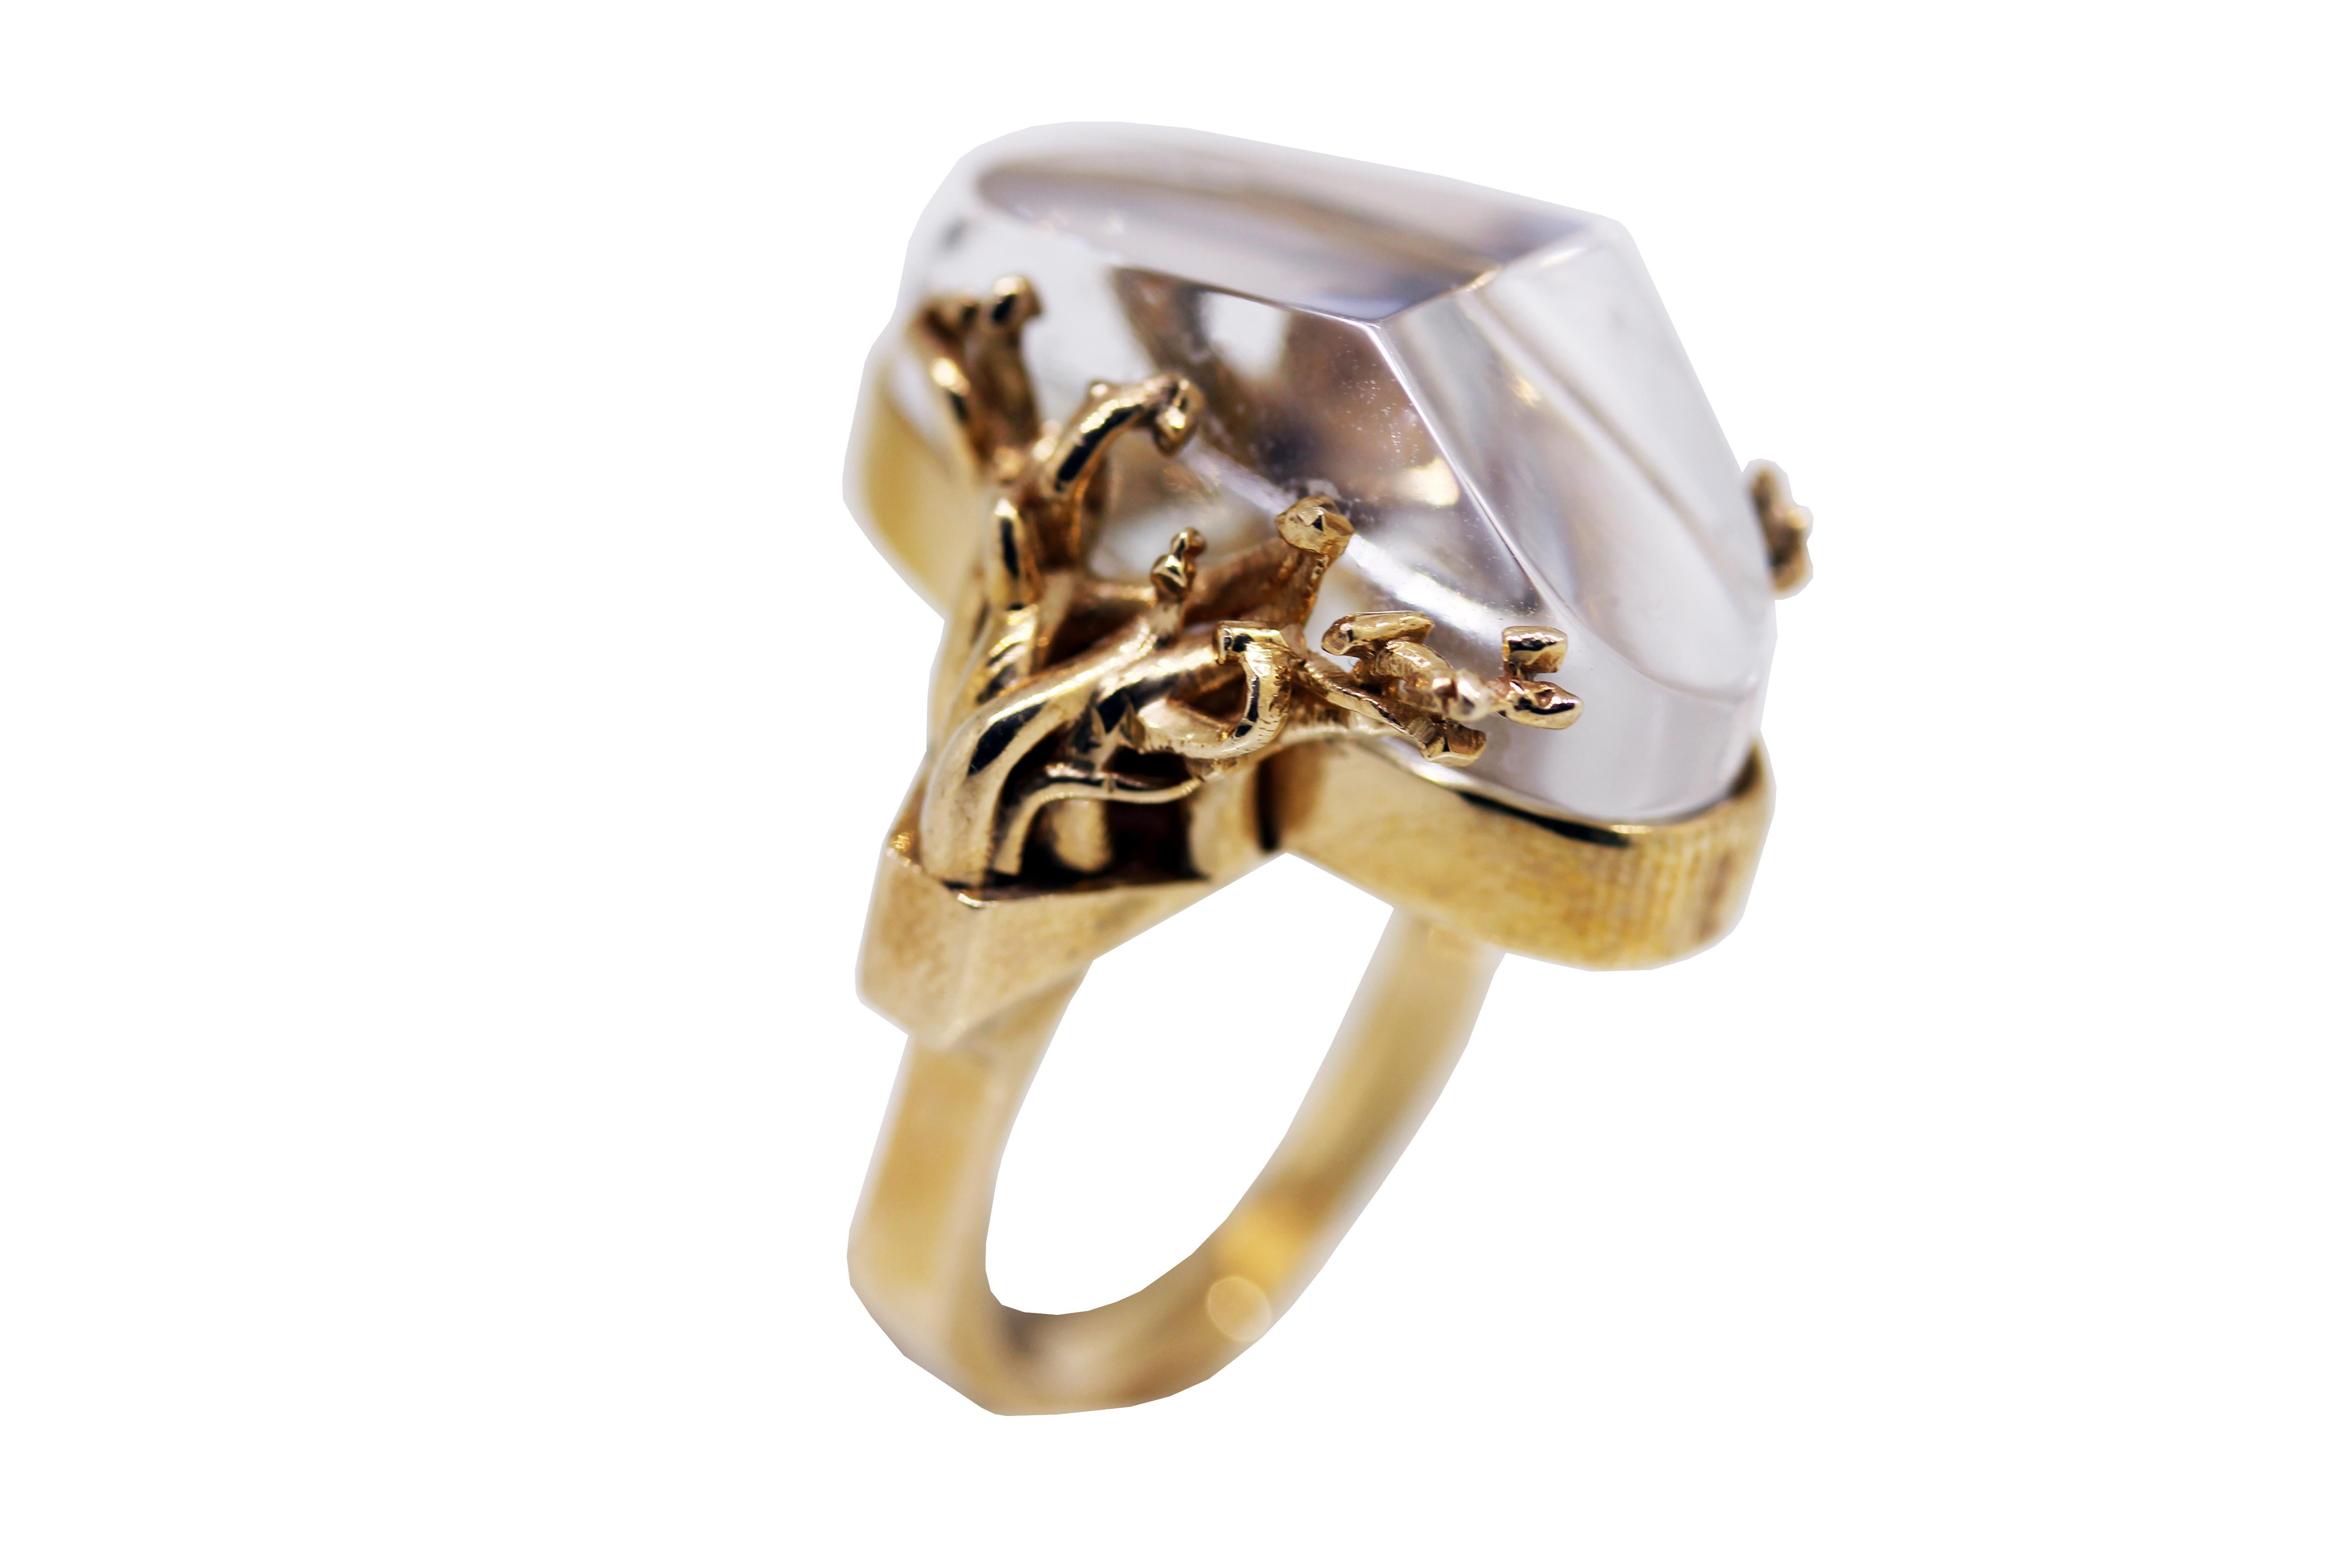 This modern handmade contemporary bronze ring, set with hand-carved rock crystal on top and natural dendric agate underneath is from MAIKO NAGAYAMA's Haute Couture Collection called 